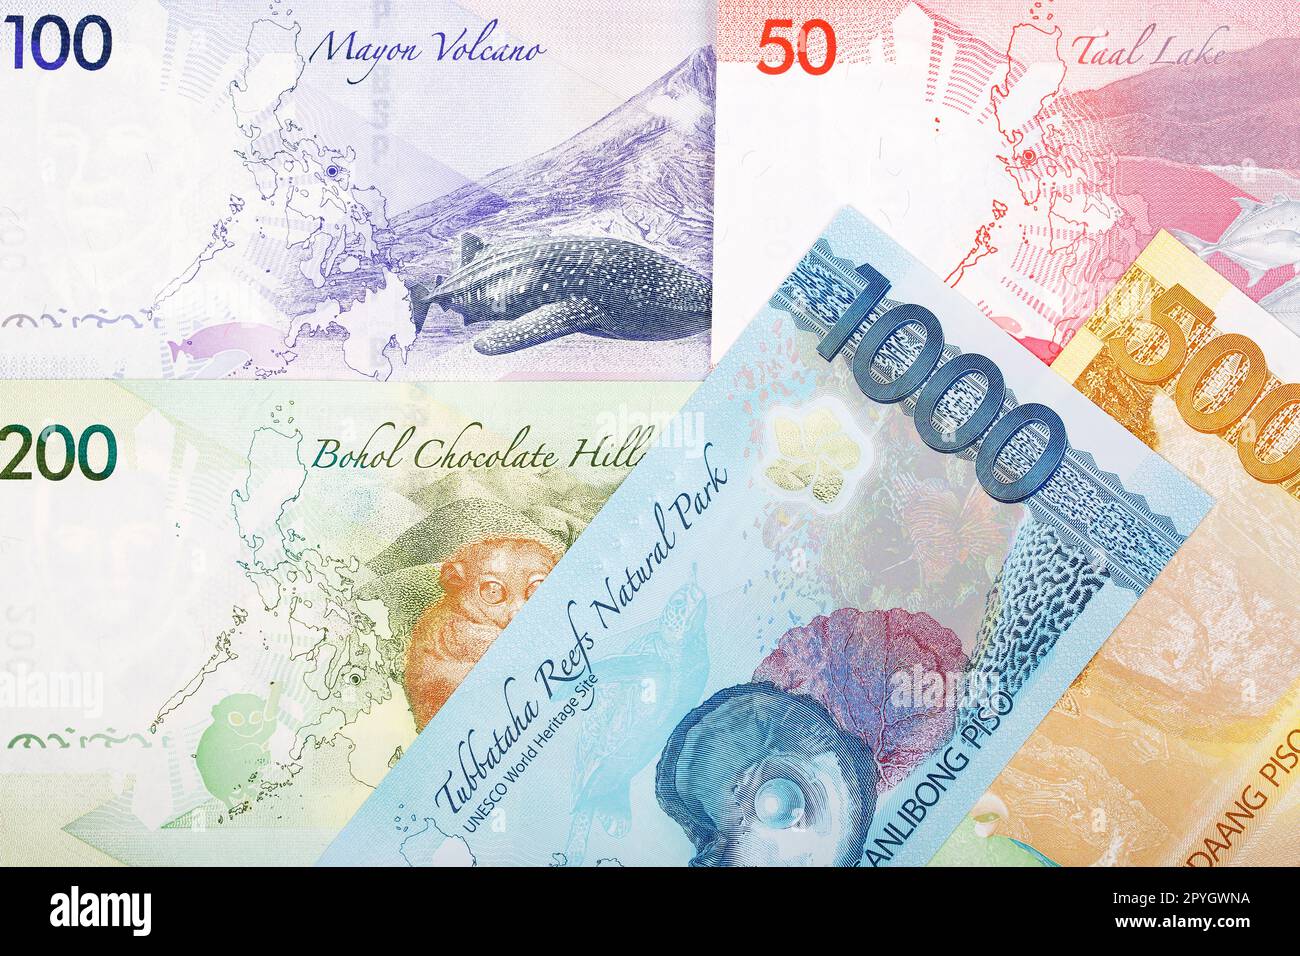 Philippine money - new series of banknotes - reverse side Stock Photo